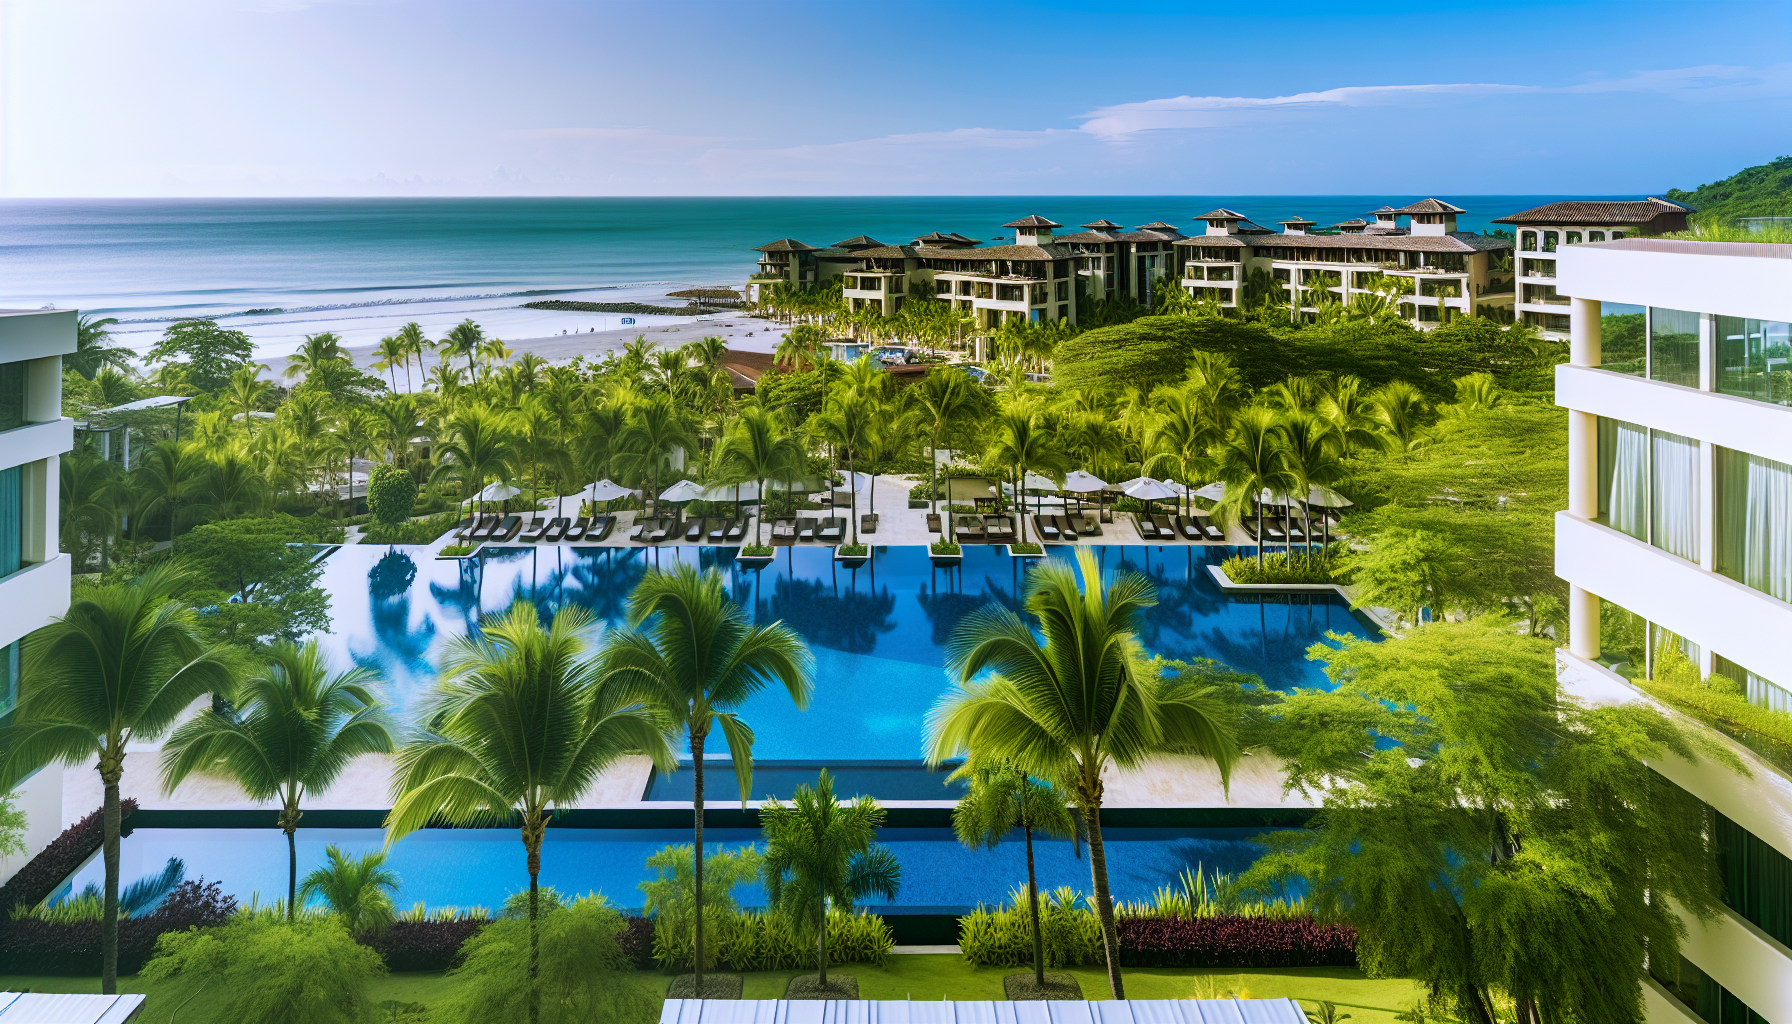 Luxurious beachfront resorts in Playa Panama with palm trees and infinity pools